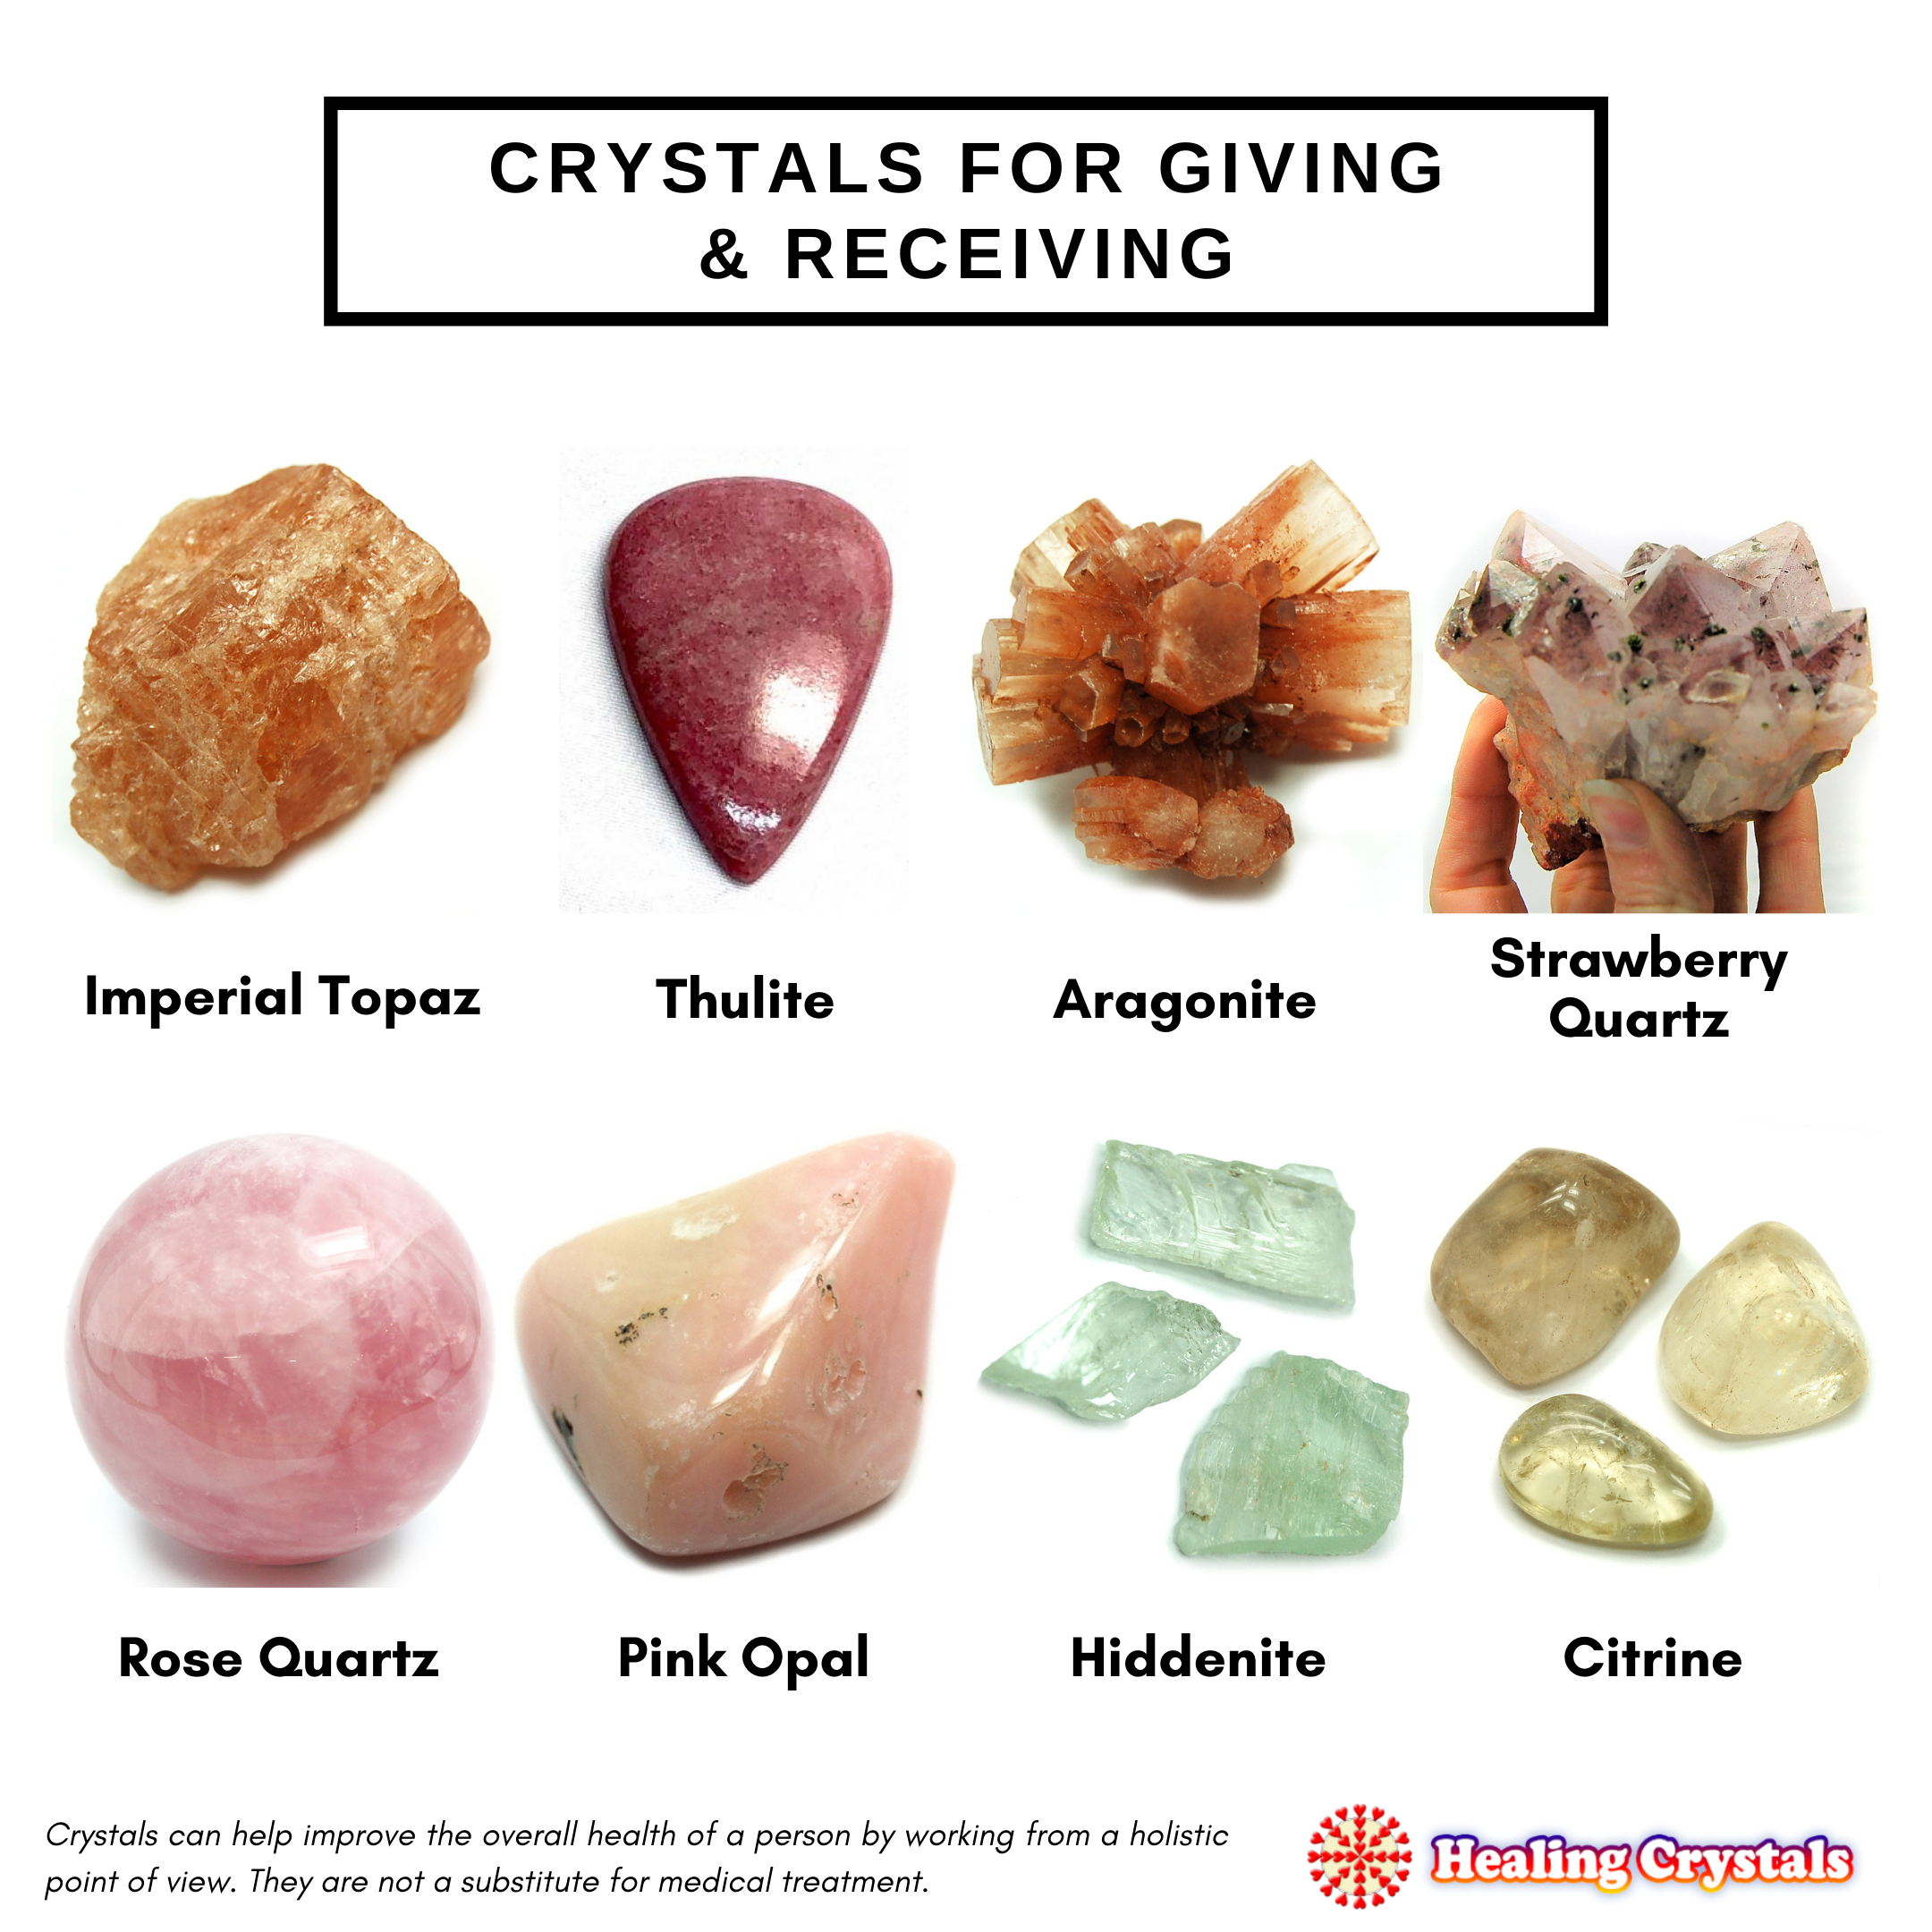 Crystal Talk: Crystals for Giving and Receiving